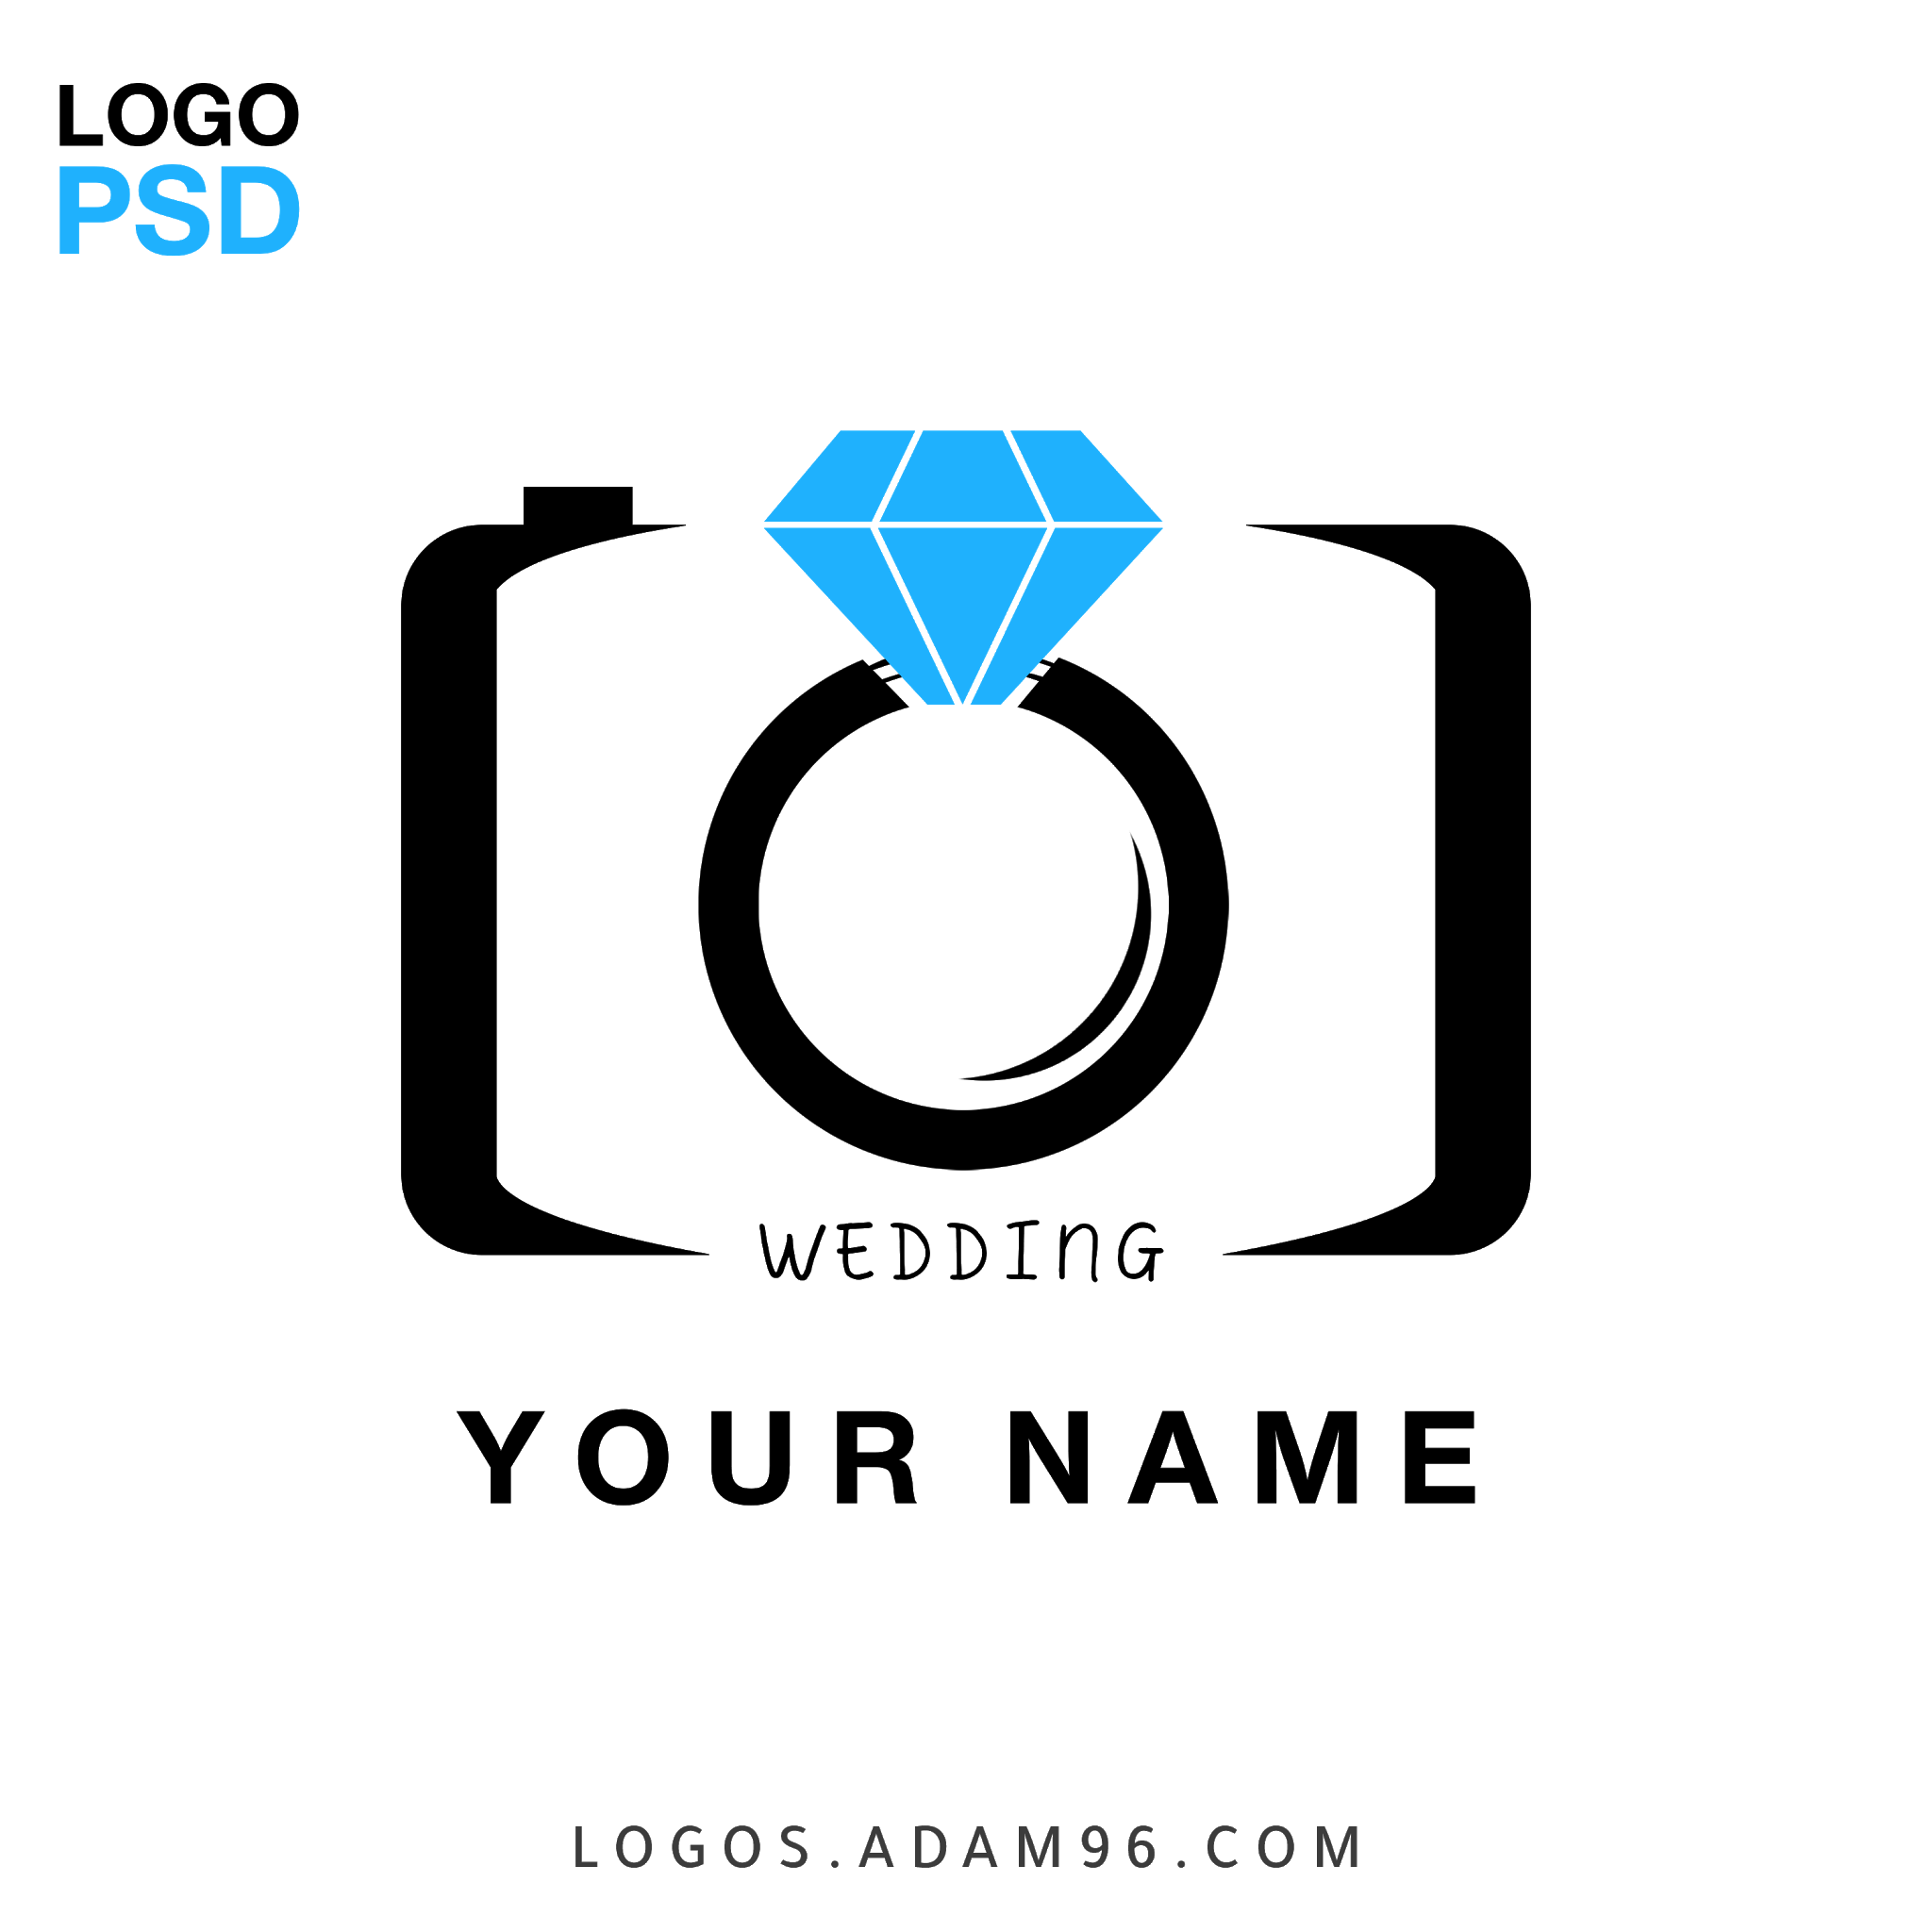 Photography Logo PSD For Free Download Without Rights